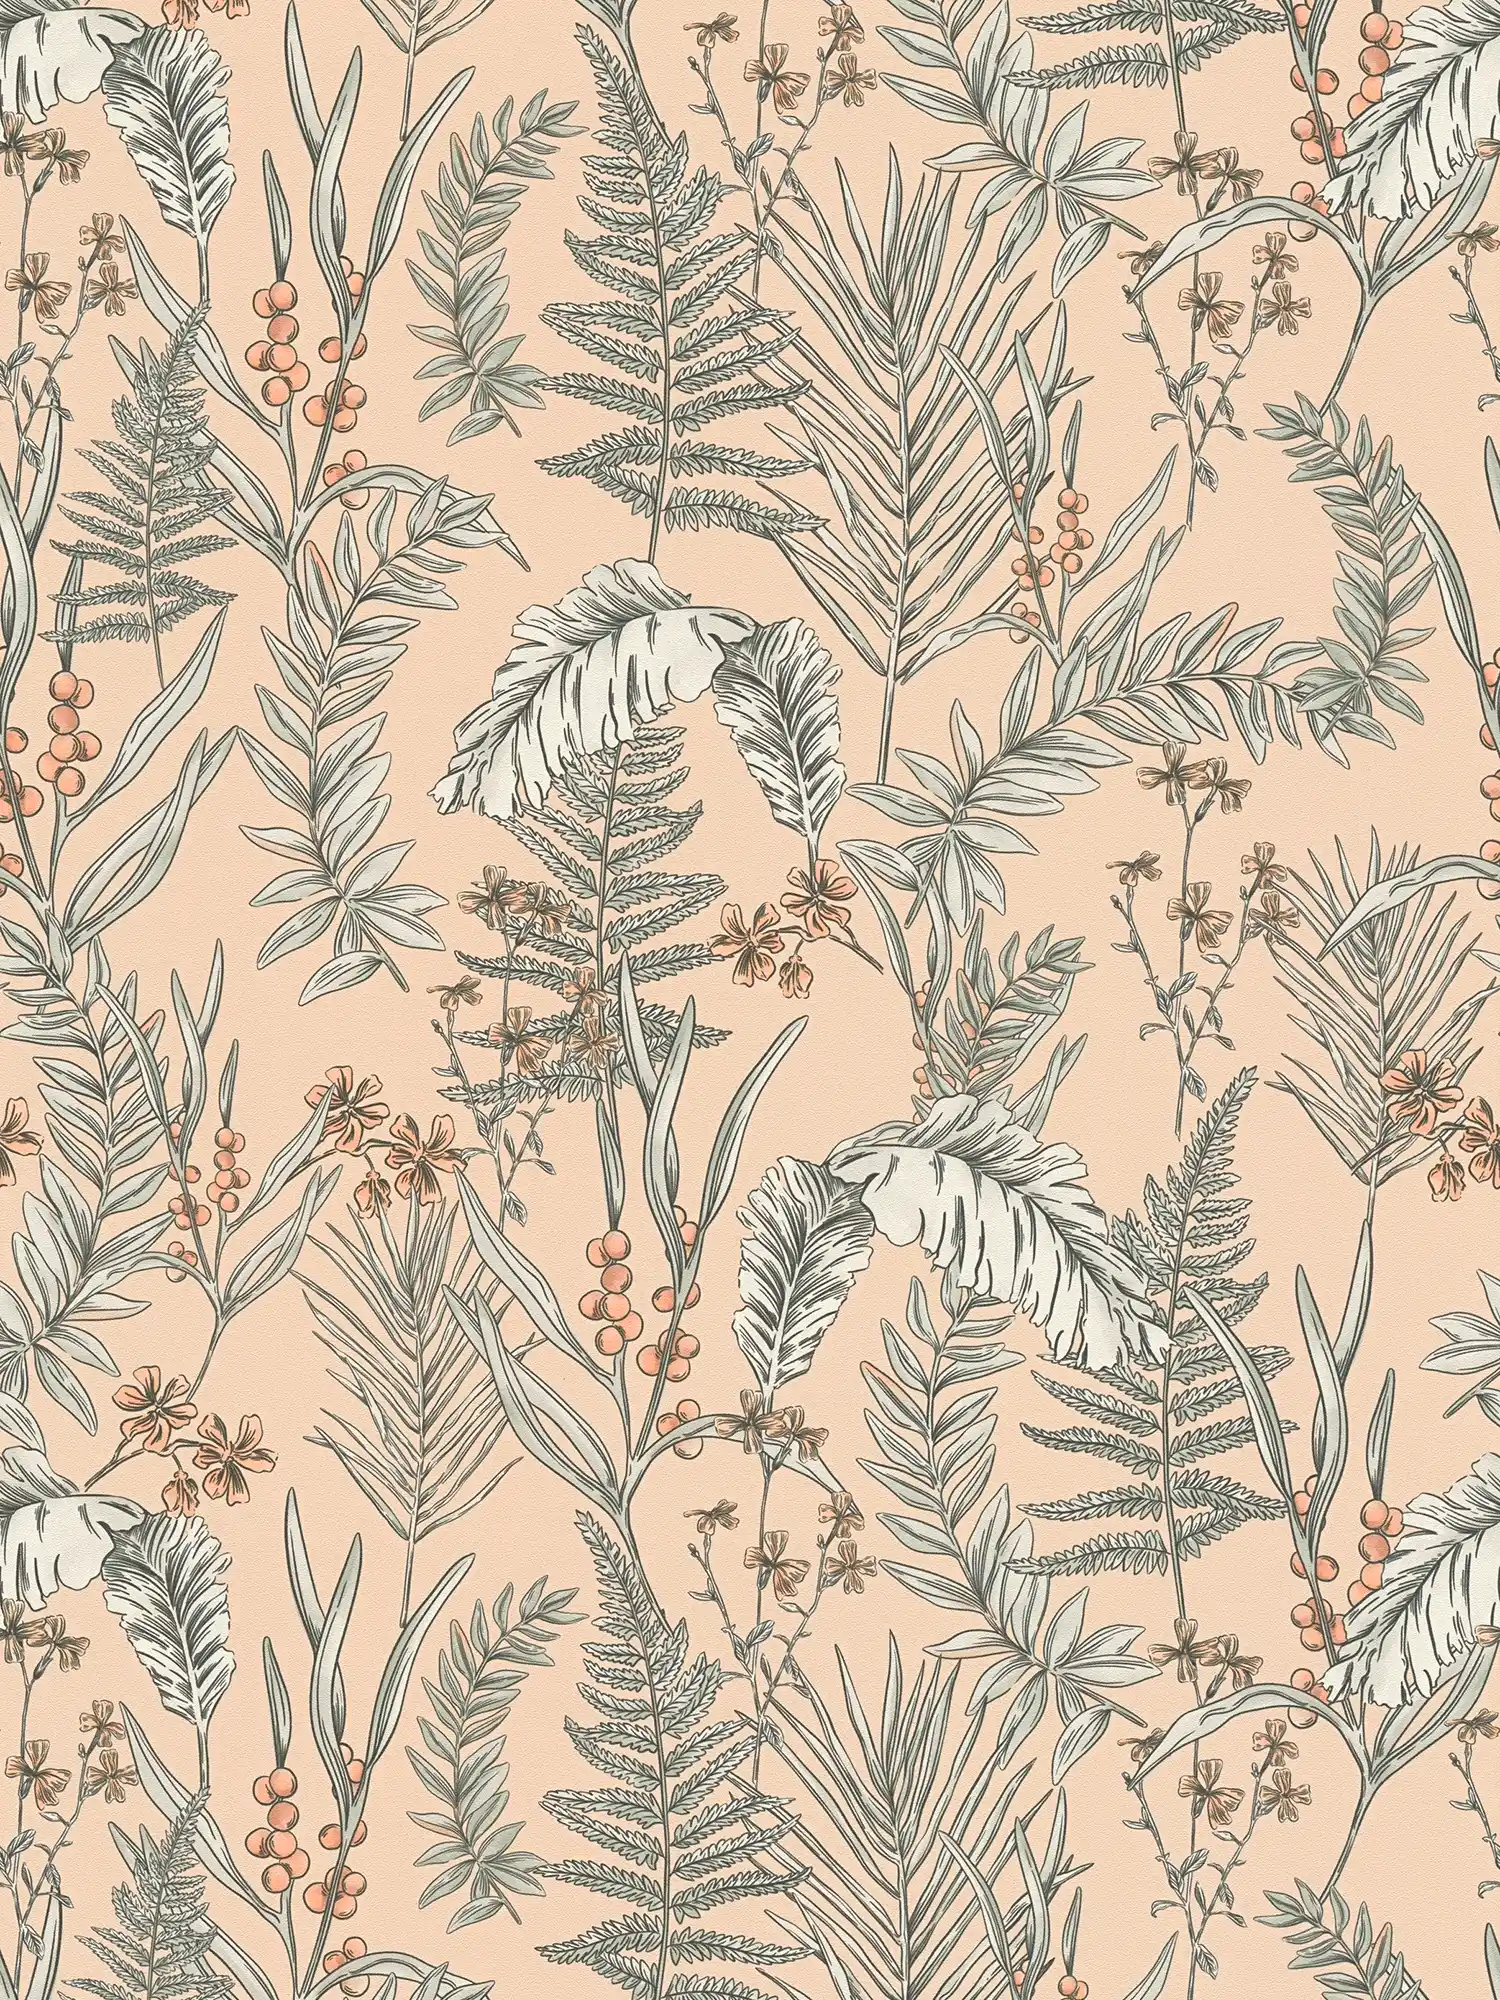 Modern wallpaper floral with flowers & leaves textured - pink, beige, white
